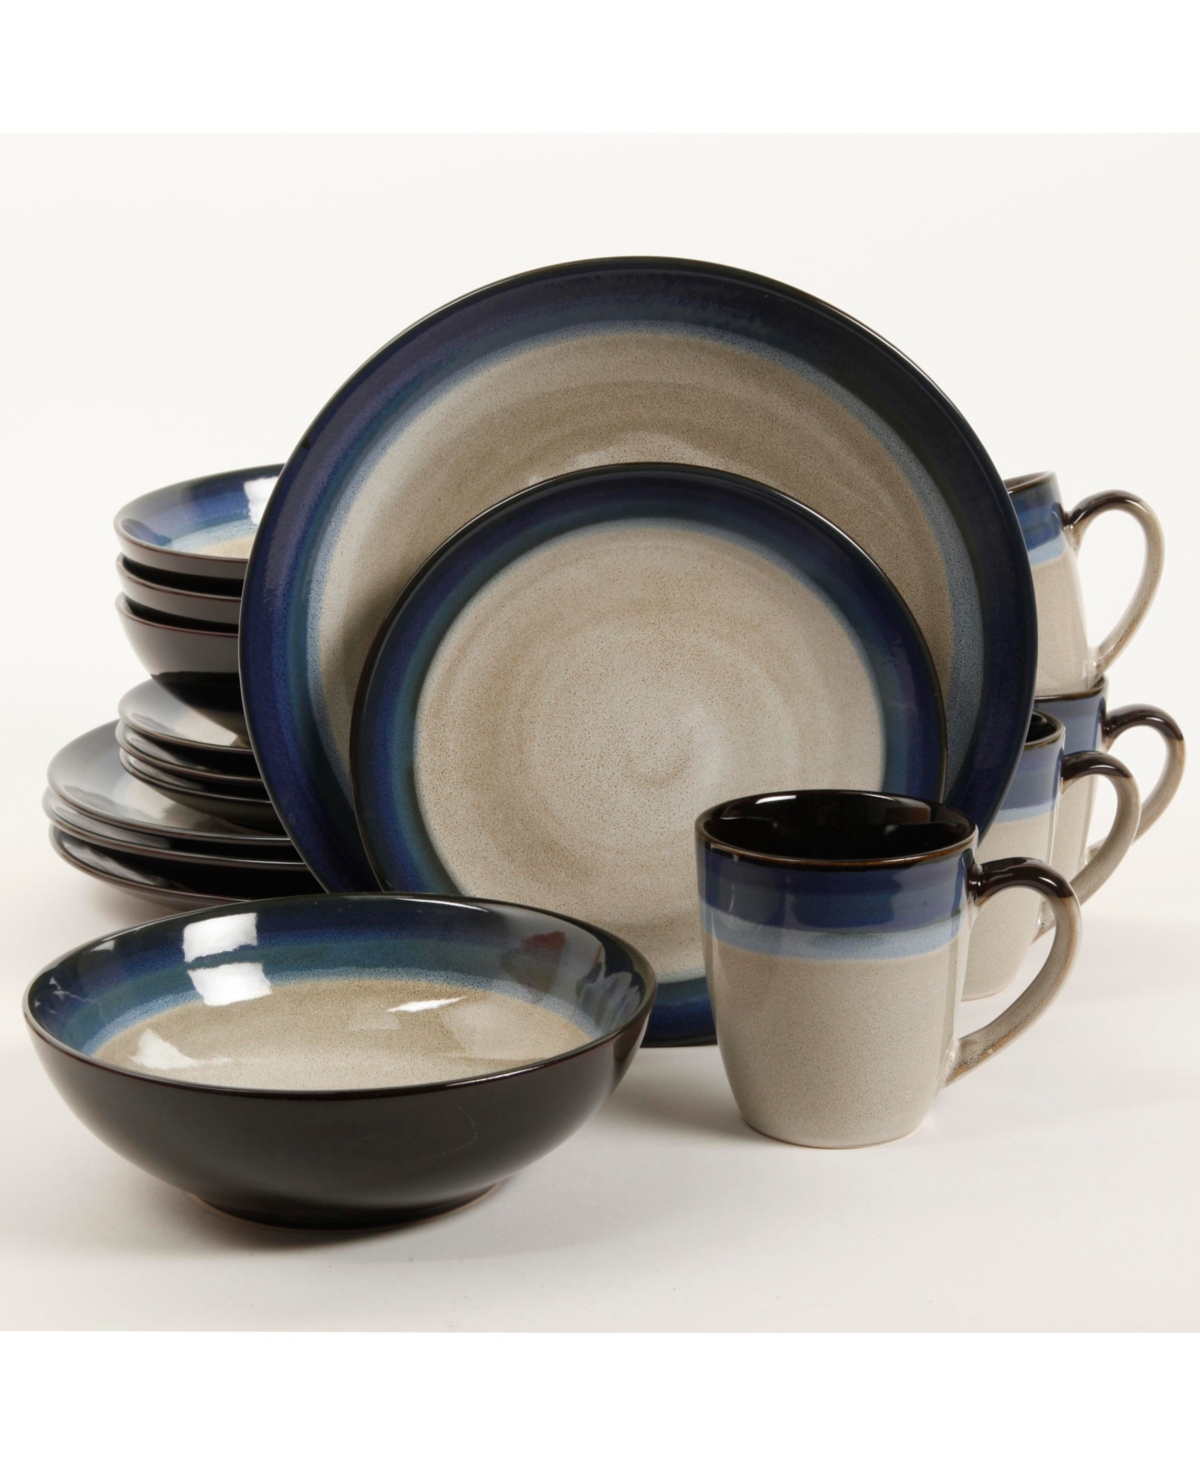 Couture Bands 16-piece Dinnerware Set Blue, Service for 4 - Blue